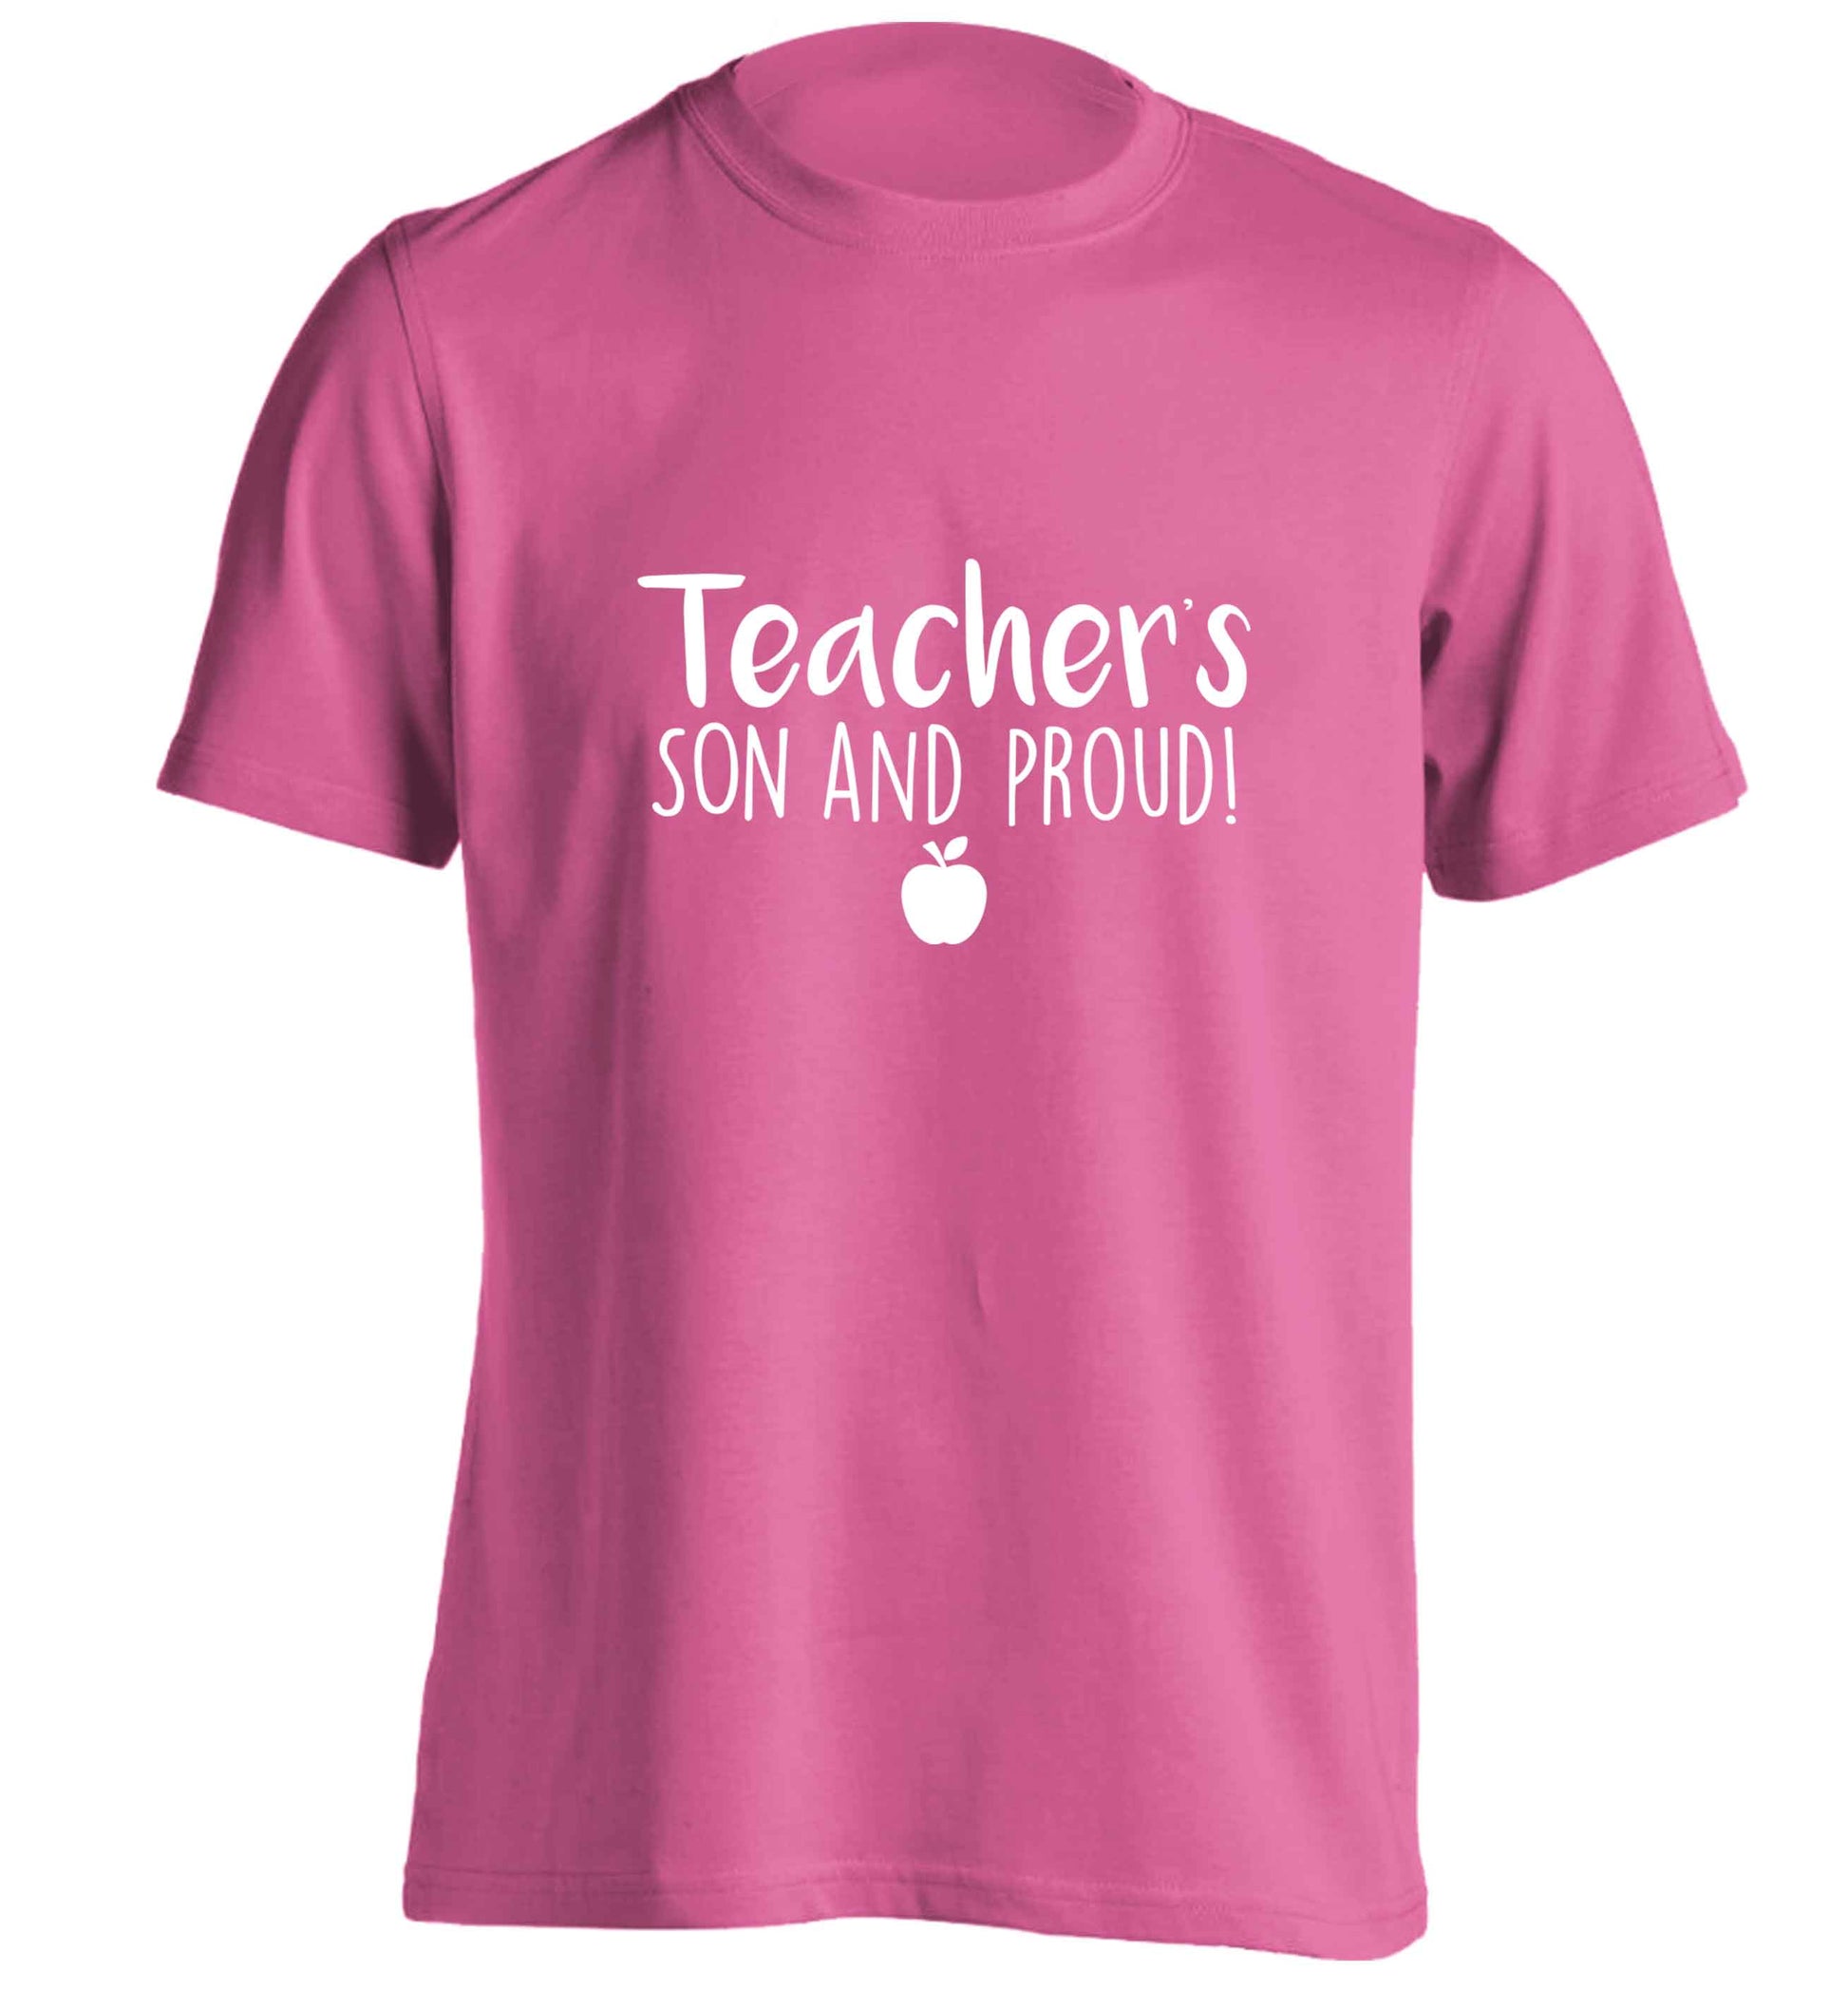 Teachers son and proud adults unisex pink Tshirt 2XL